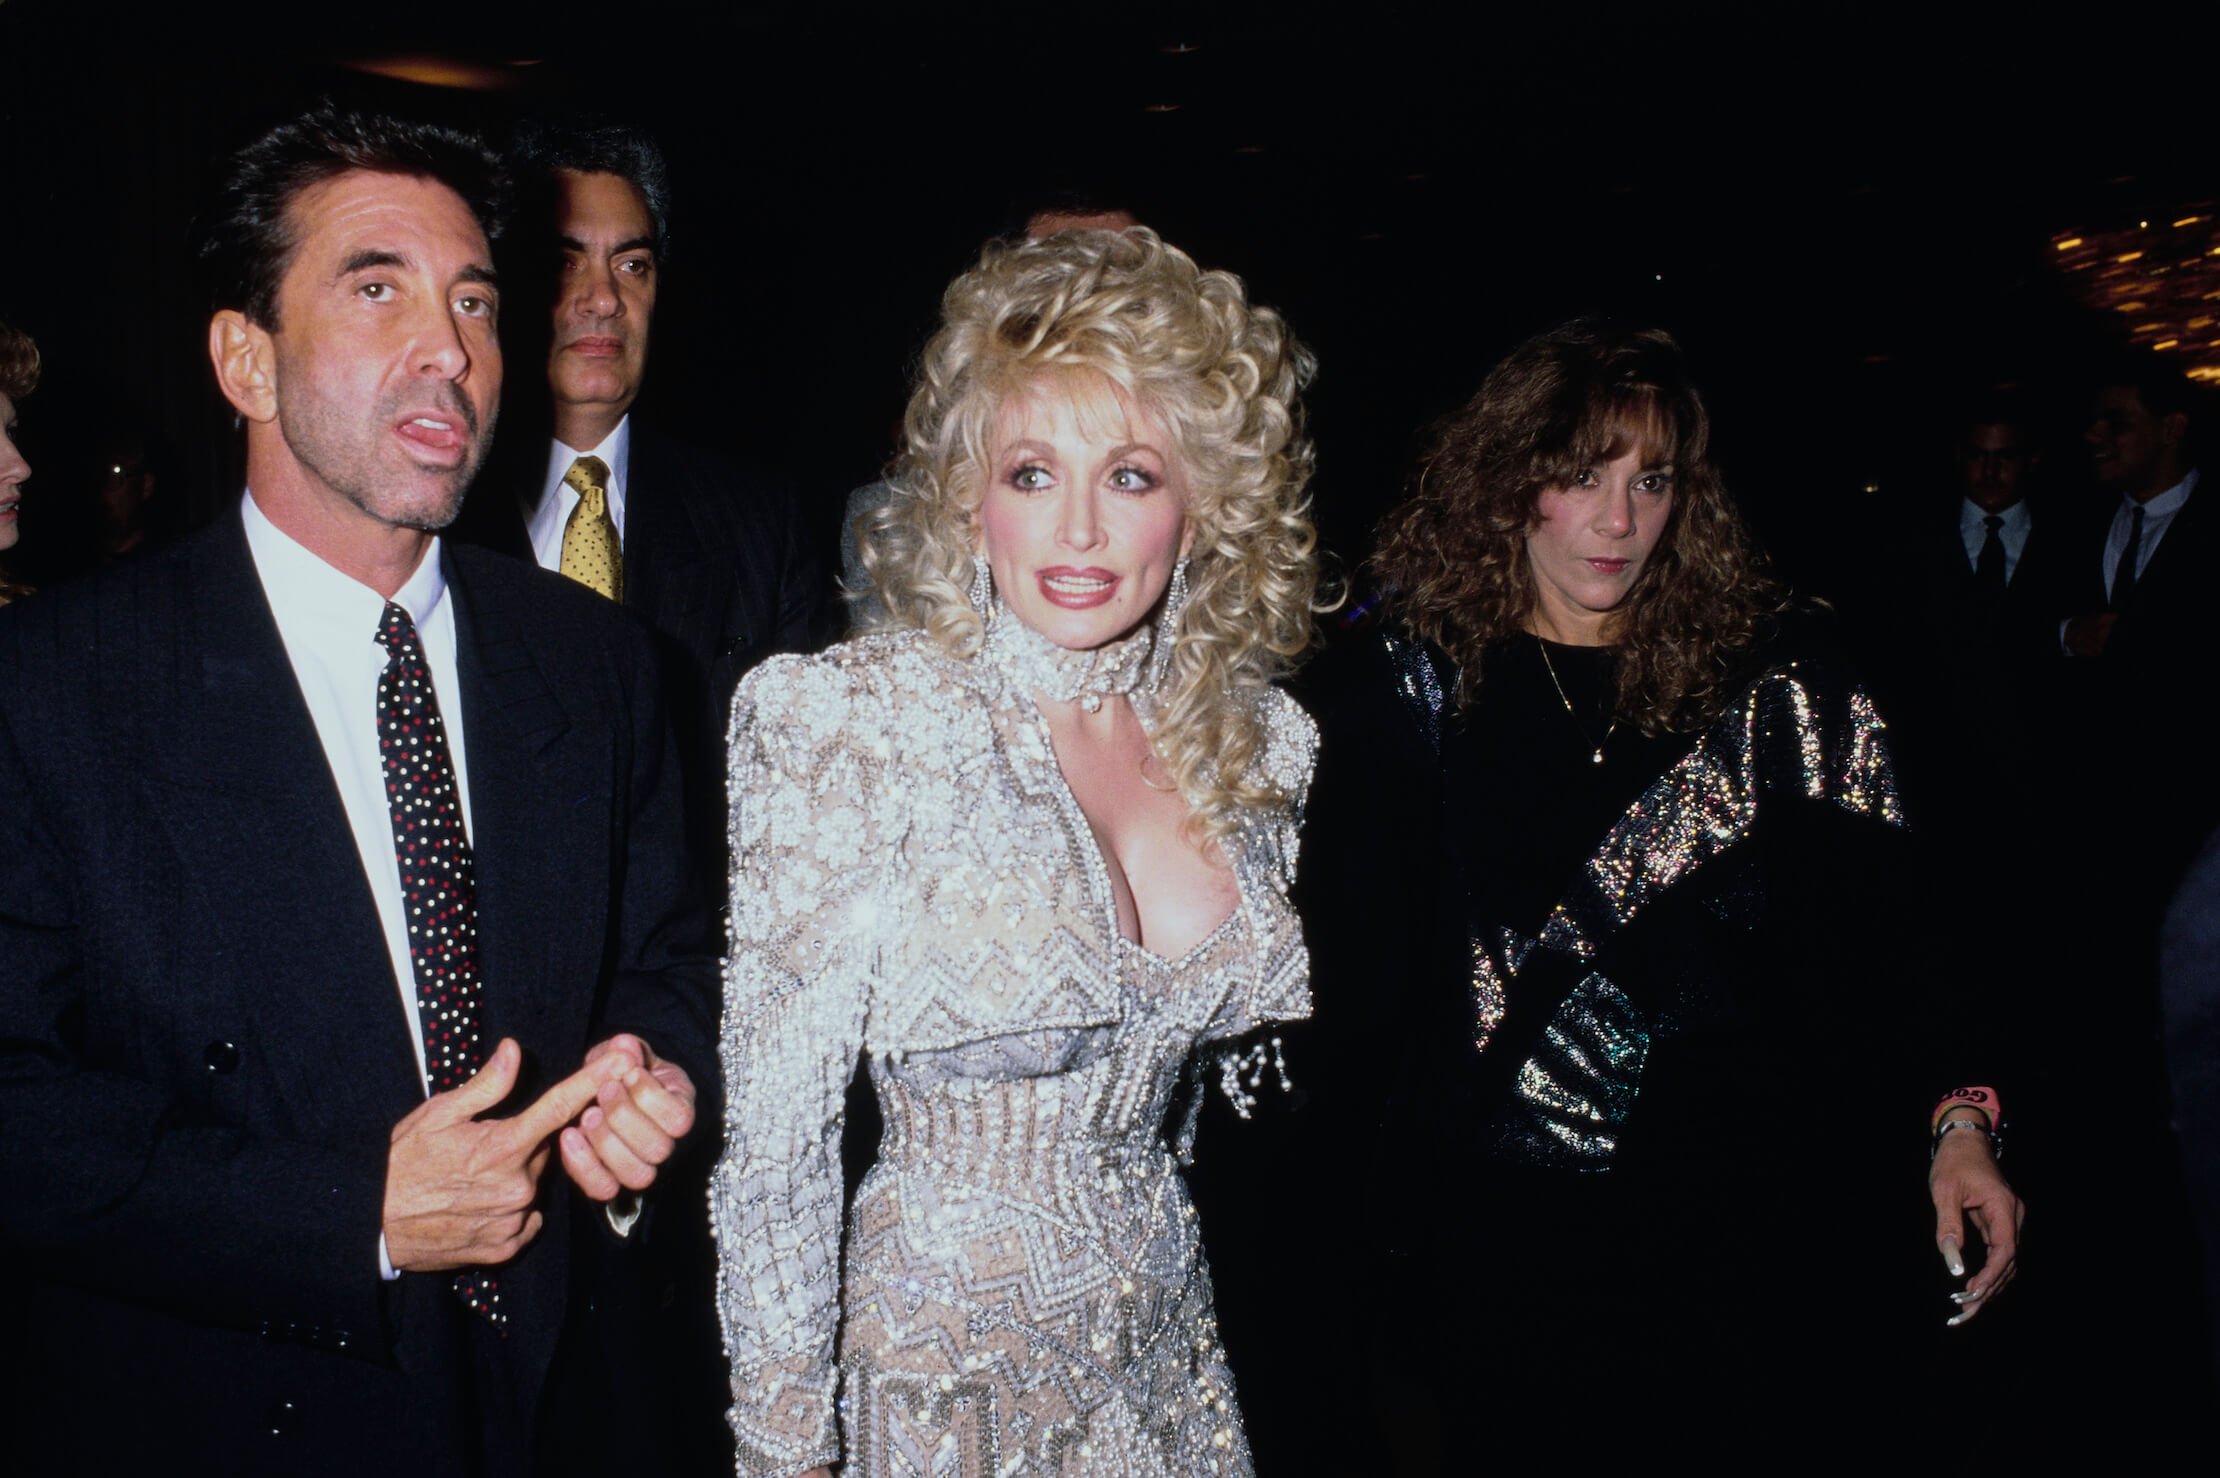 Dolly Parton wearing a sparkly gown at a red carpet event in the '90s